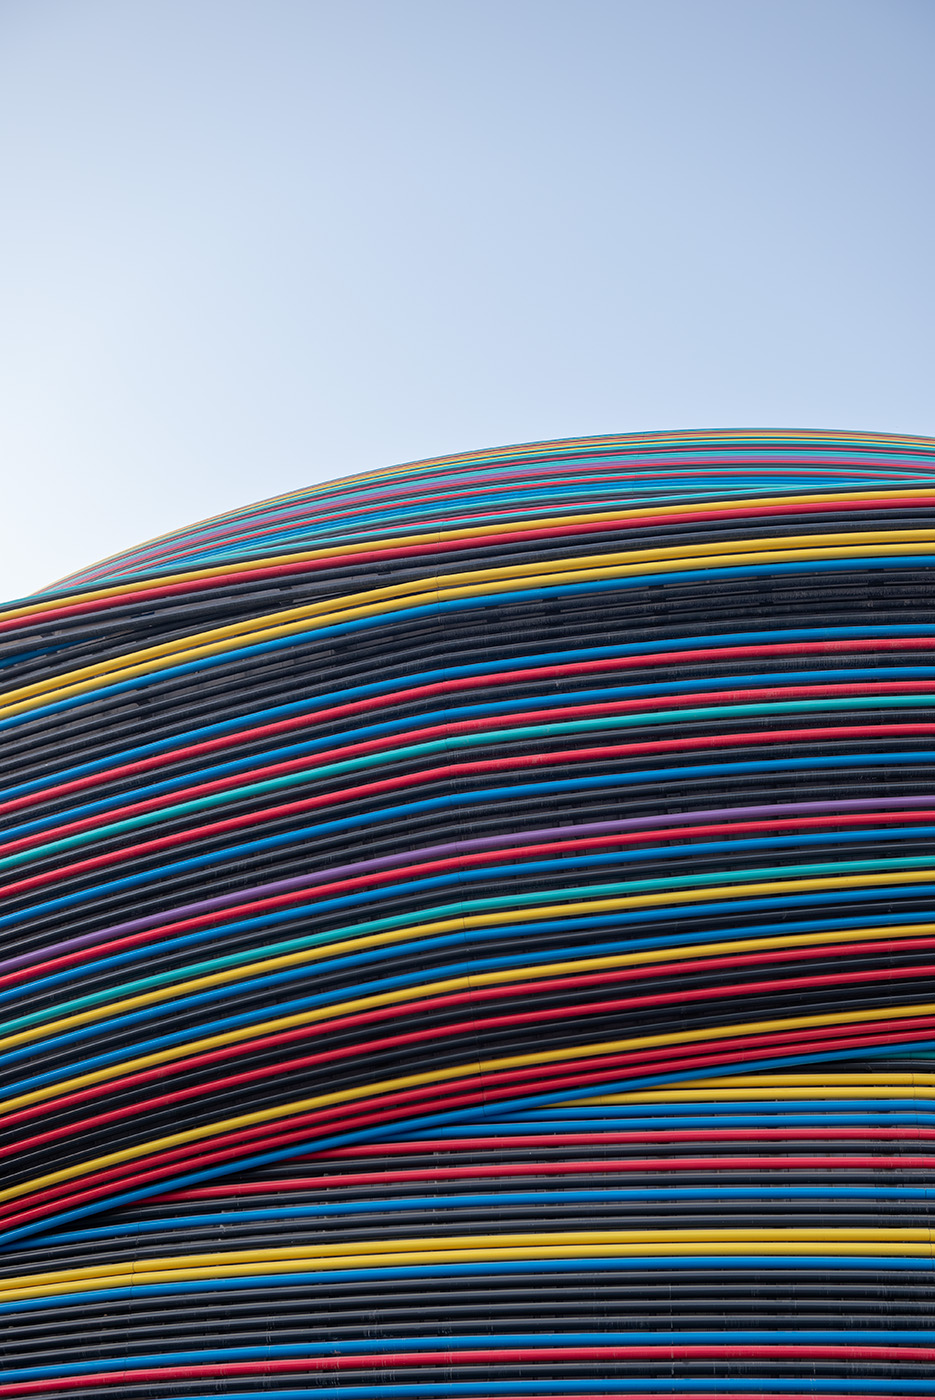 Colorful lines of the Russia pavilion against a blue sky